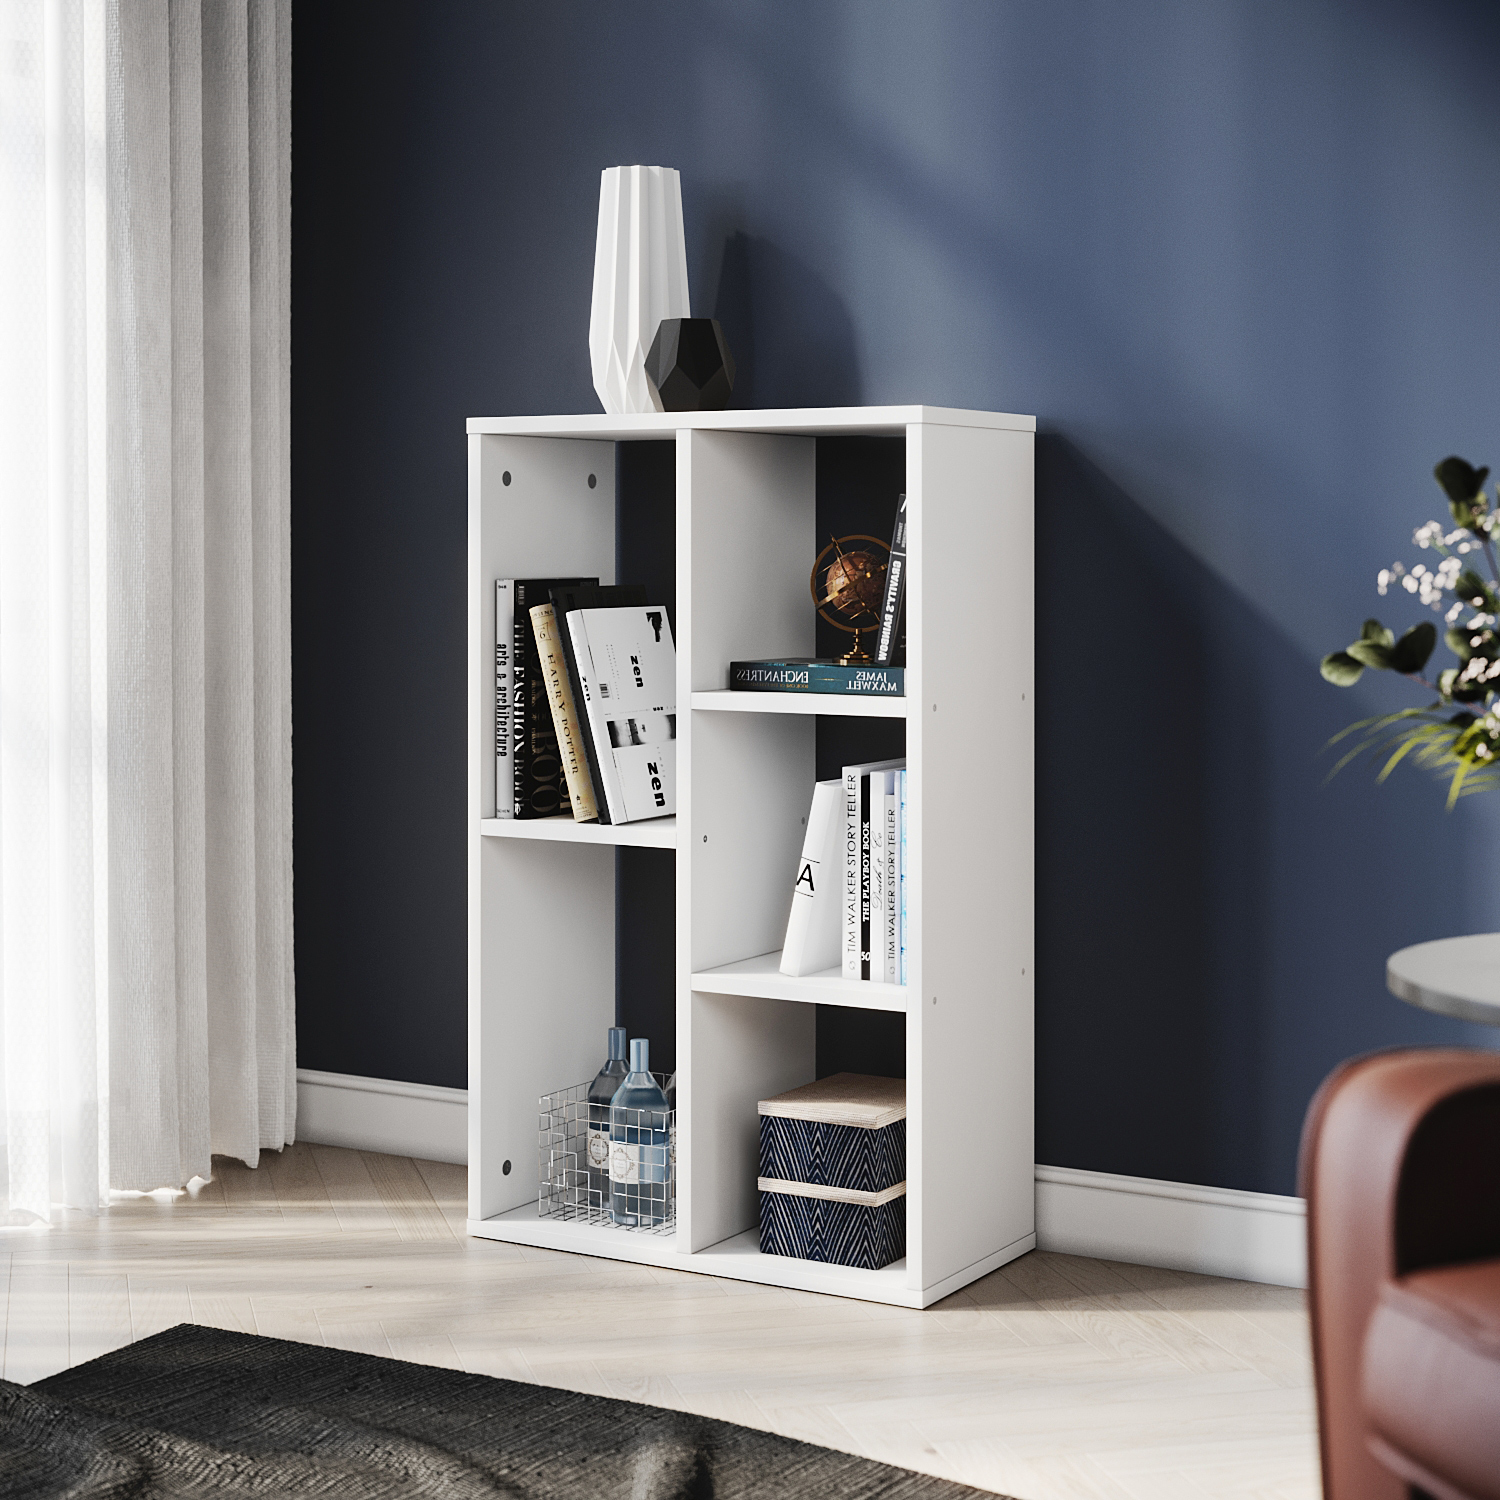 WHY CHOOSE OUR WOODEN BOOKCASE?